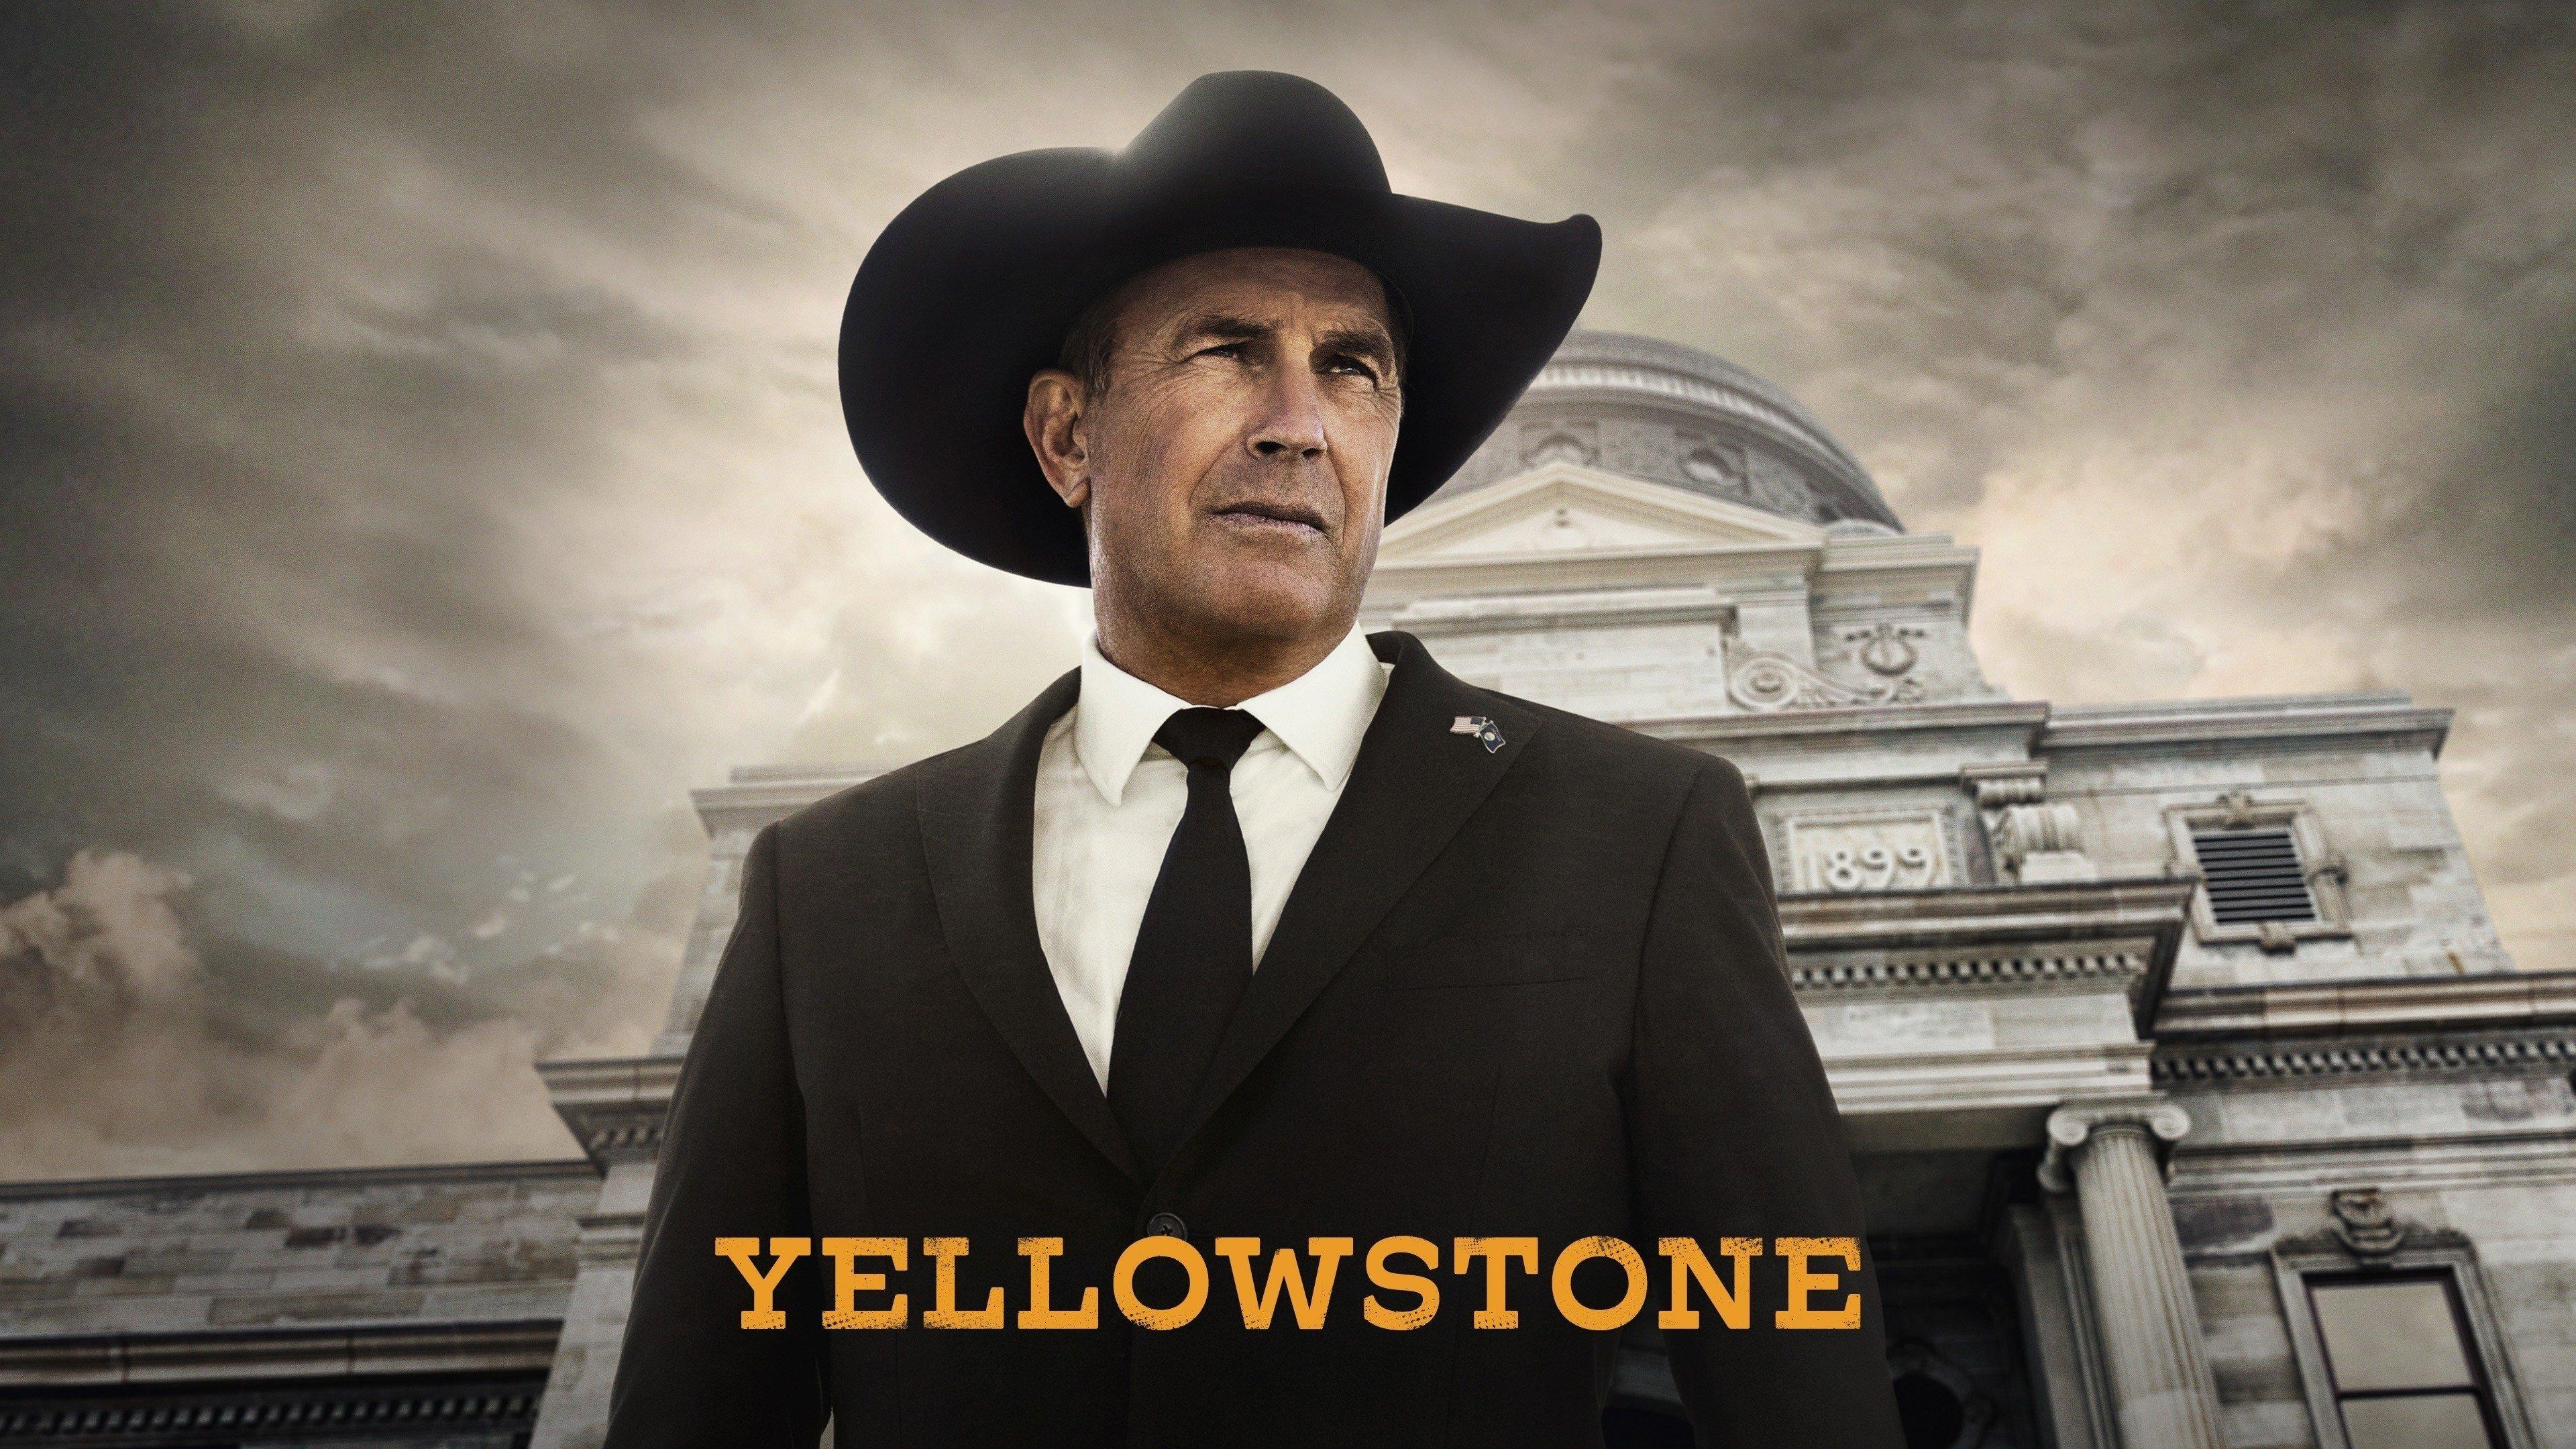 Watch Yellowstone Streaming Online on Philo (Free Trial)